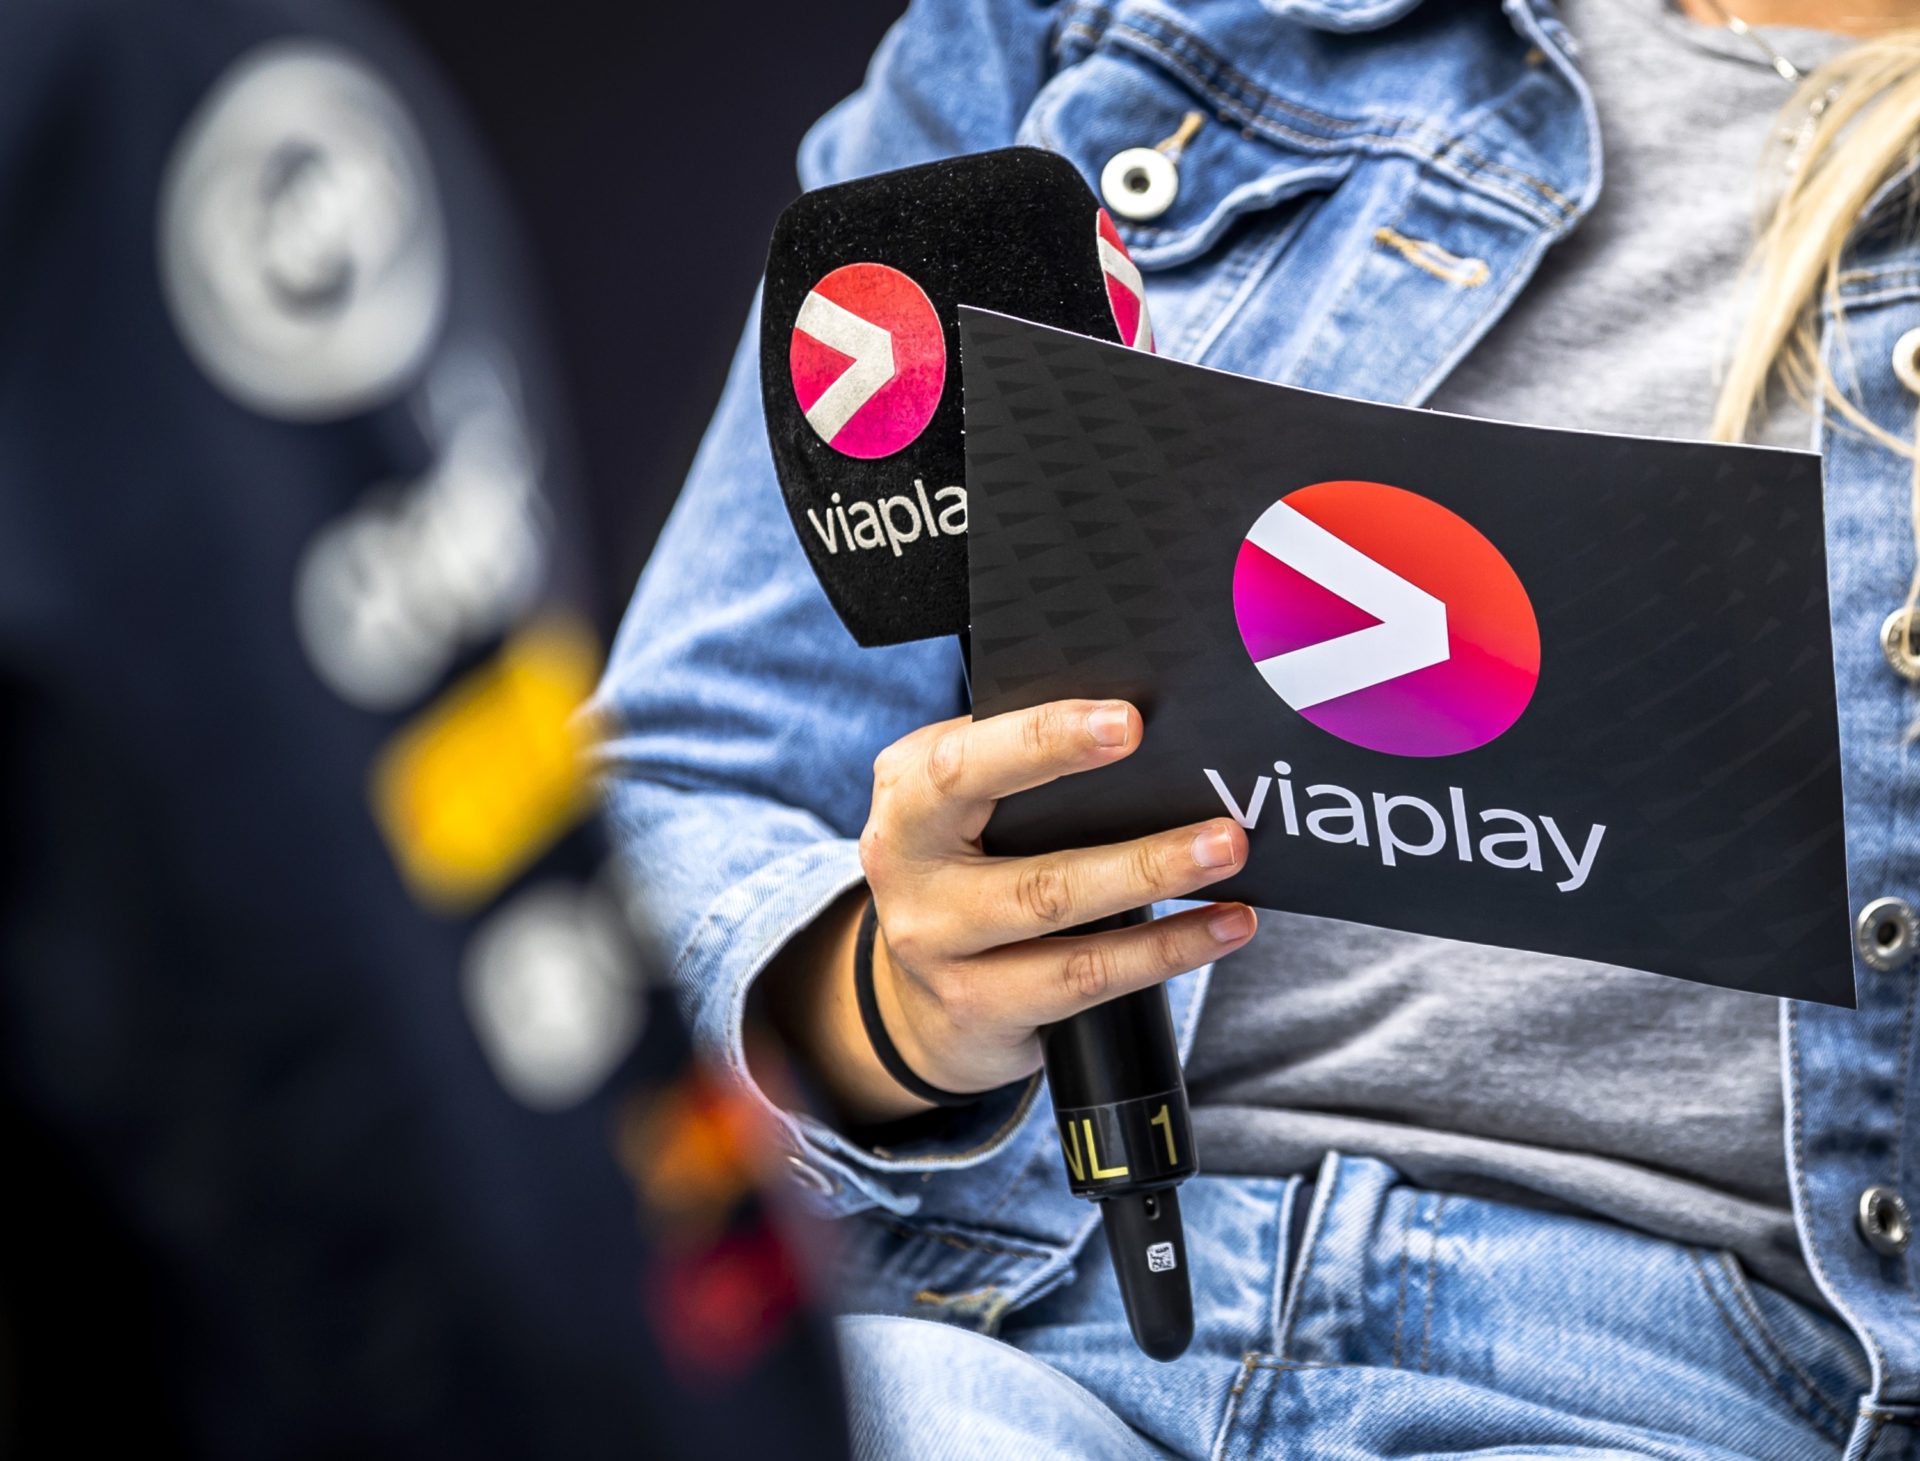 Viaplay are the new sponsors of the League Cup